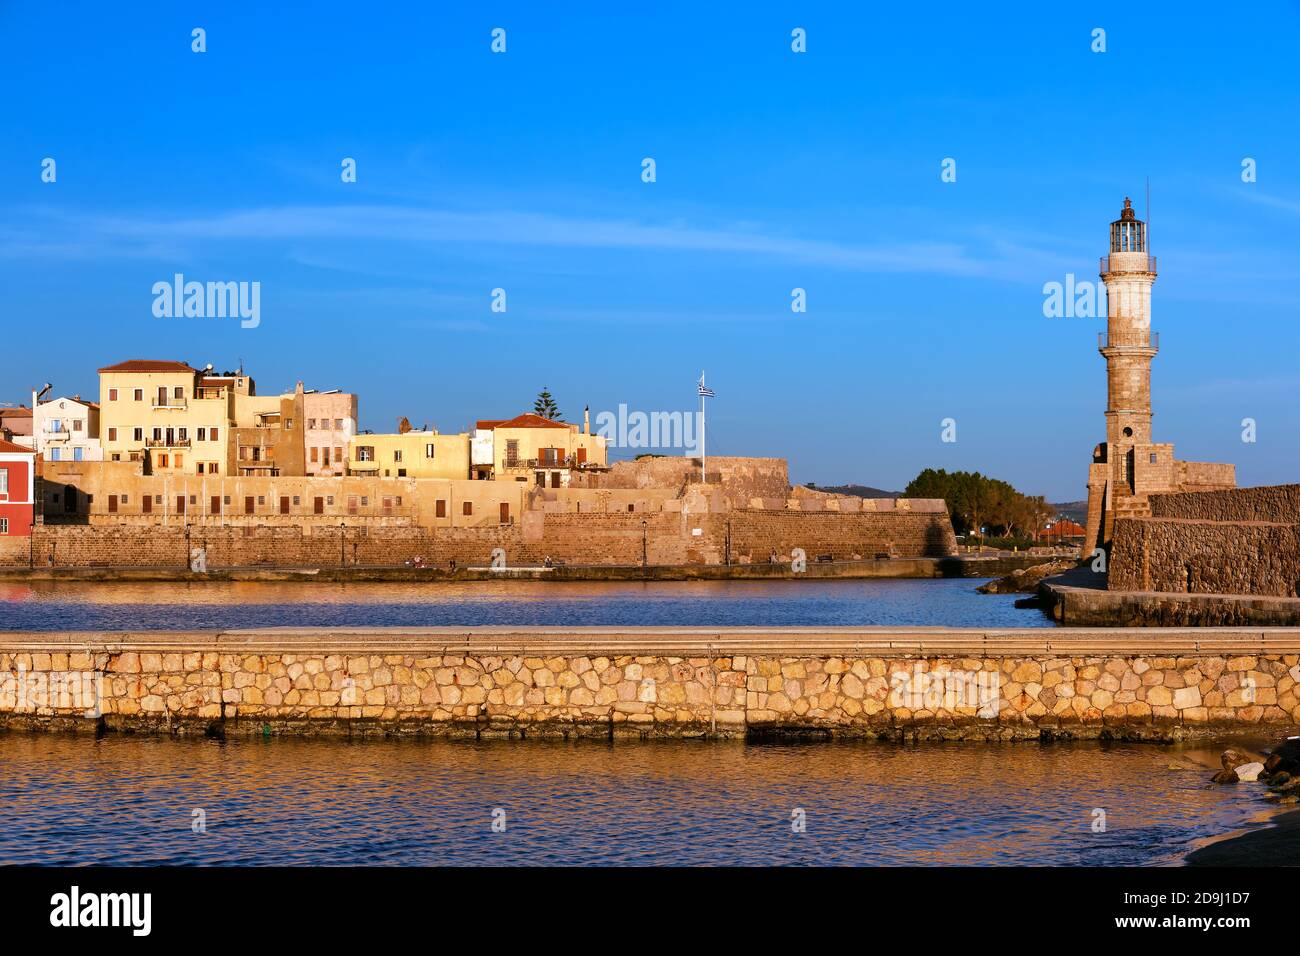 Beautiful morning view of Venetian Lighthouse, Firka castle walls and piers of Old Venetian harbour of Chania, Crete, Greece at golden hour.  Stock Photo